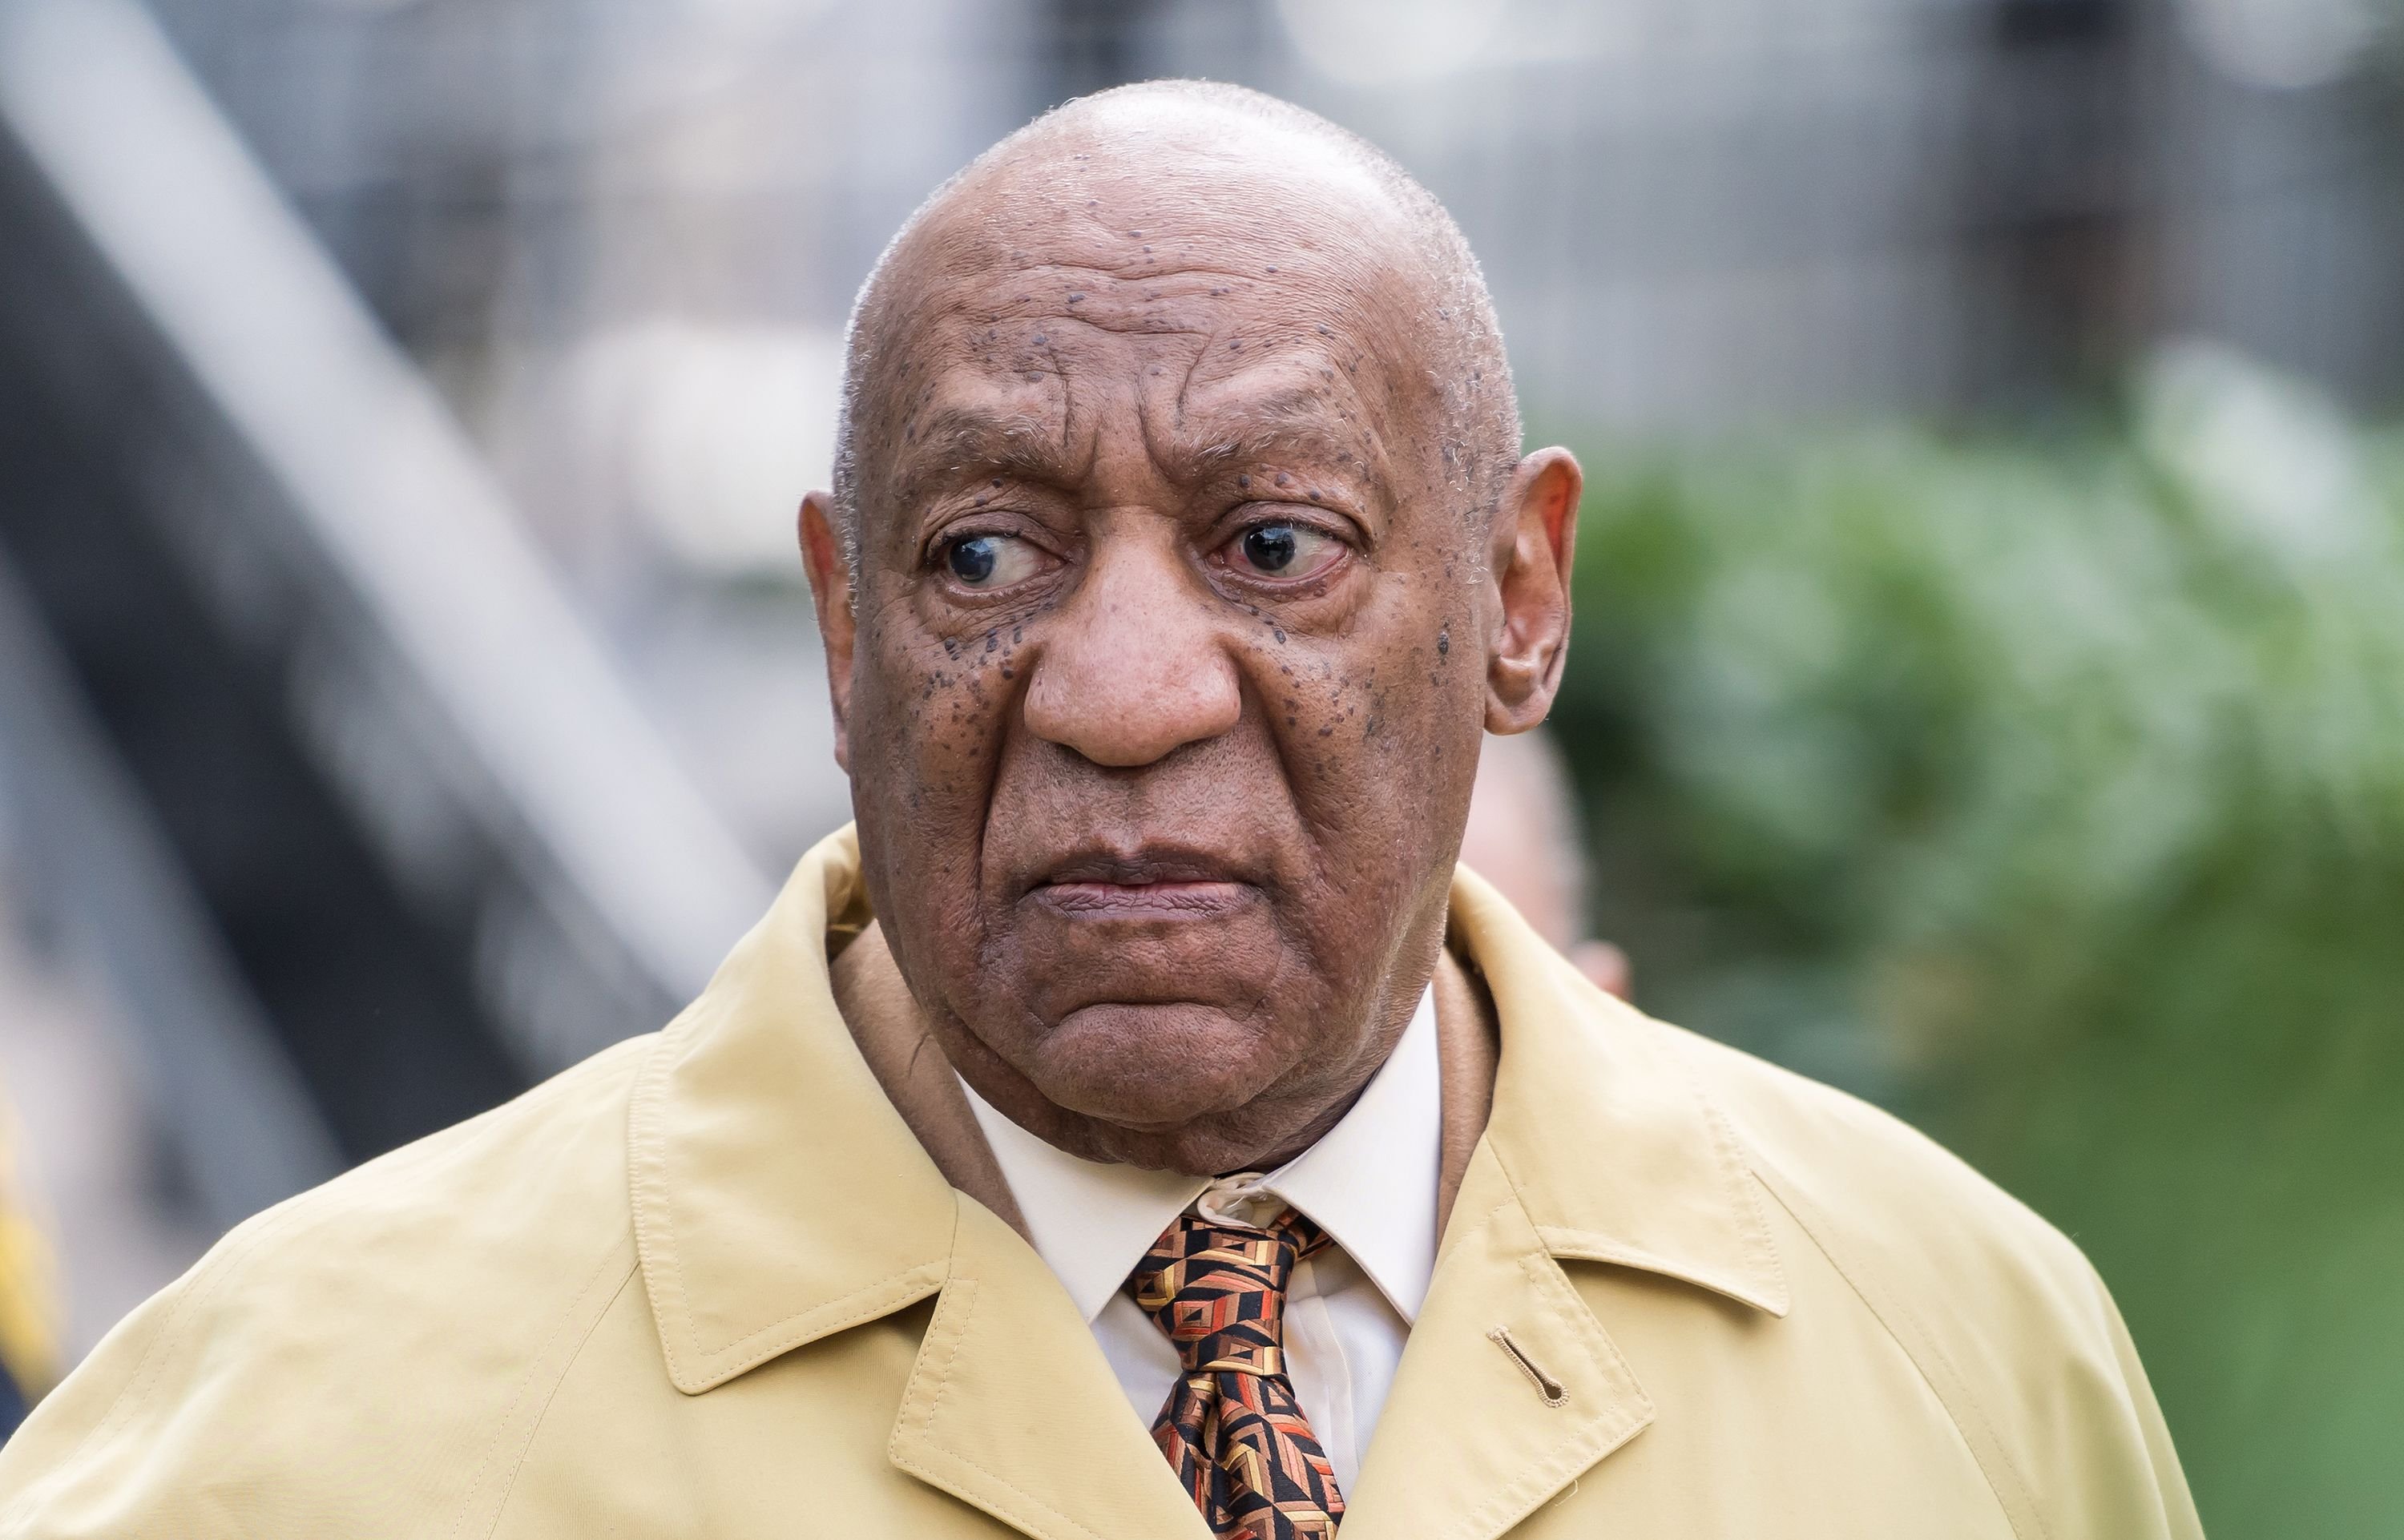 Stand-up comedian, actor, Bill Cosby at the Montgomery County Courthouse after Bill Cosby Change Of Venue Hearing on February 27, 2017 | Photo: Getty Images